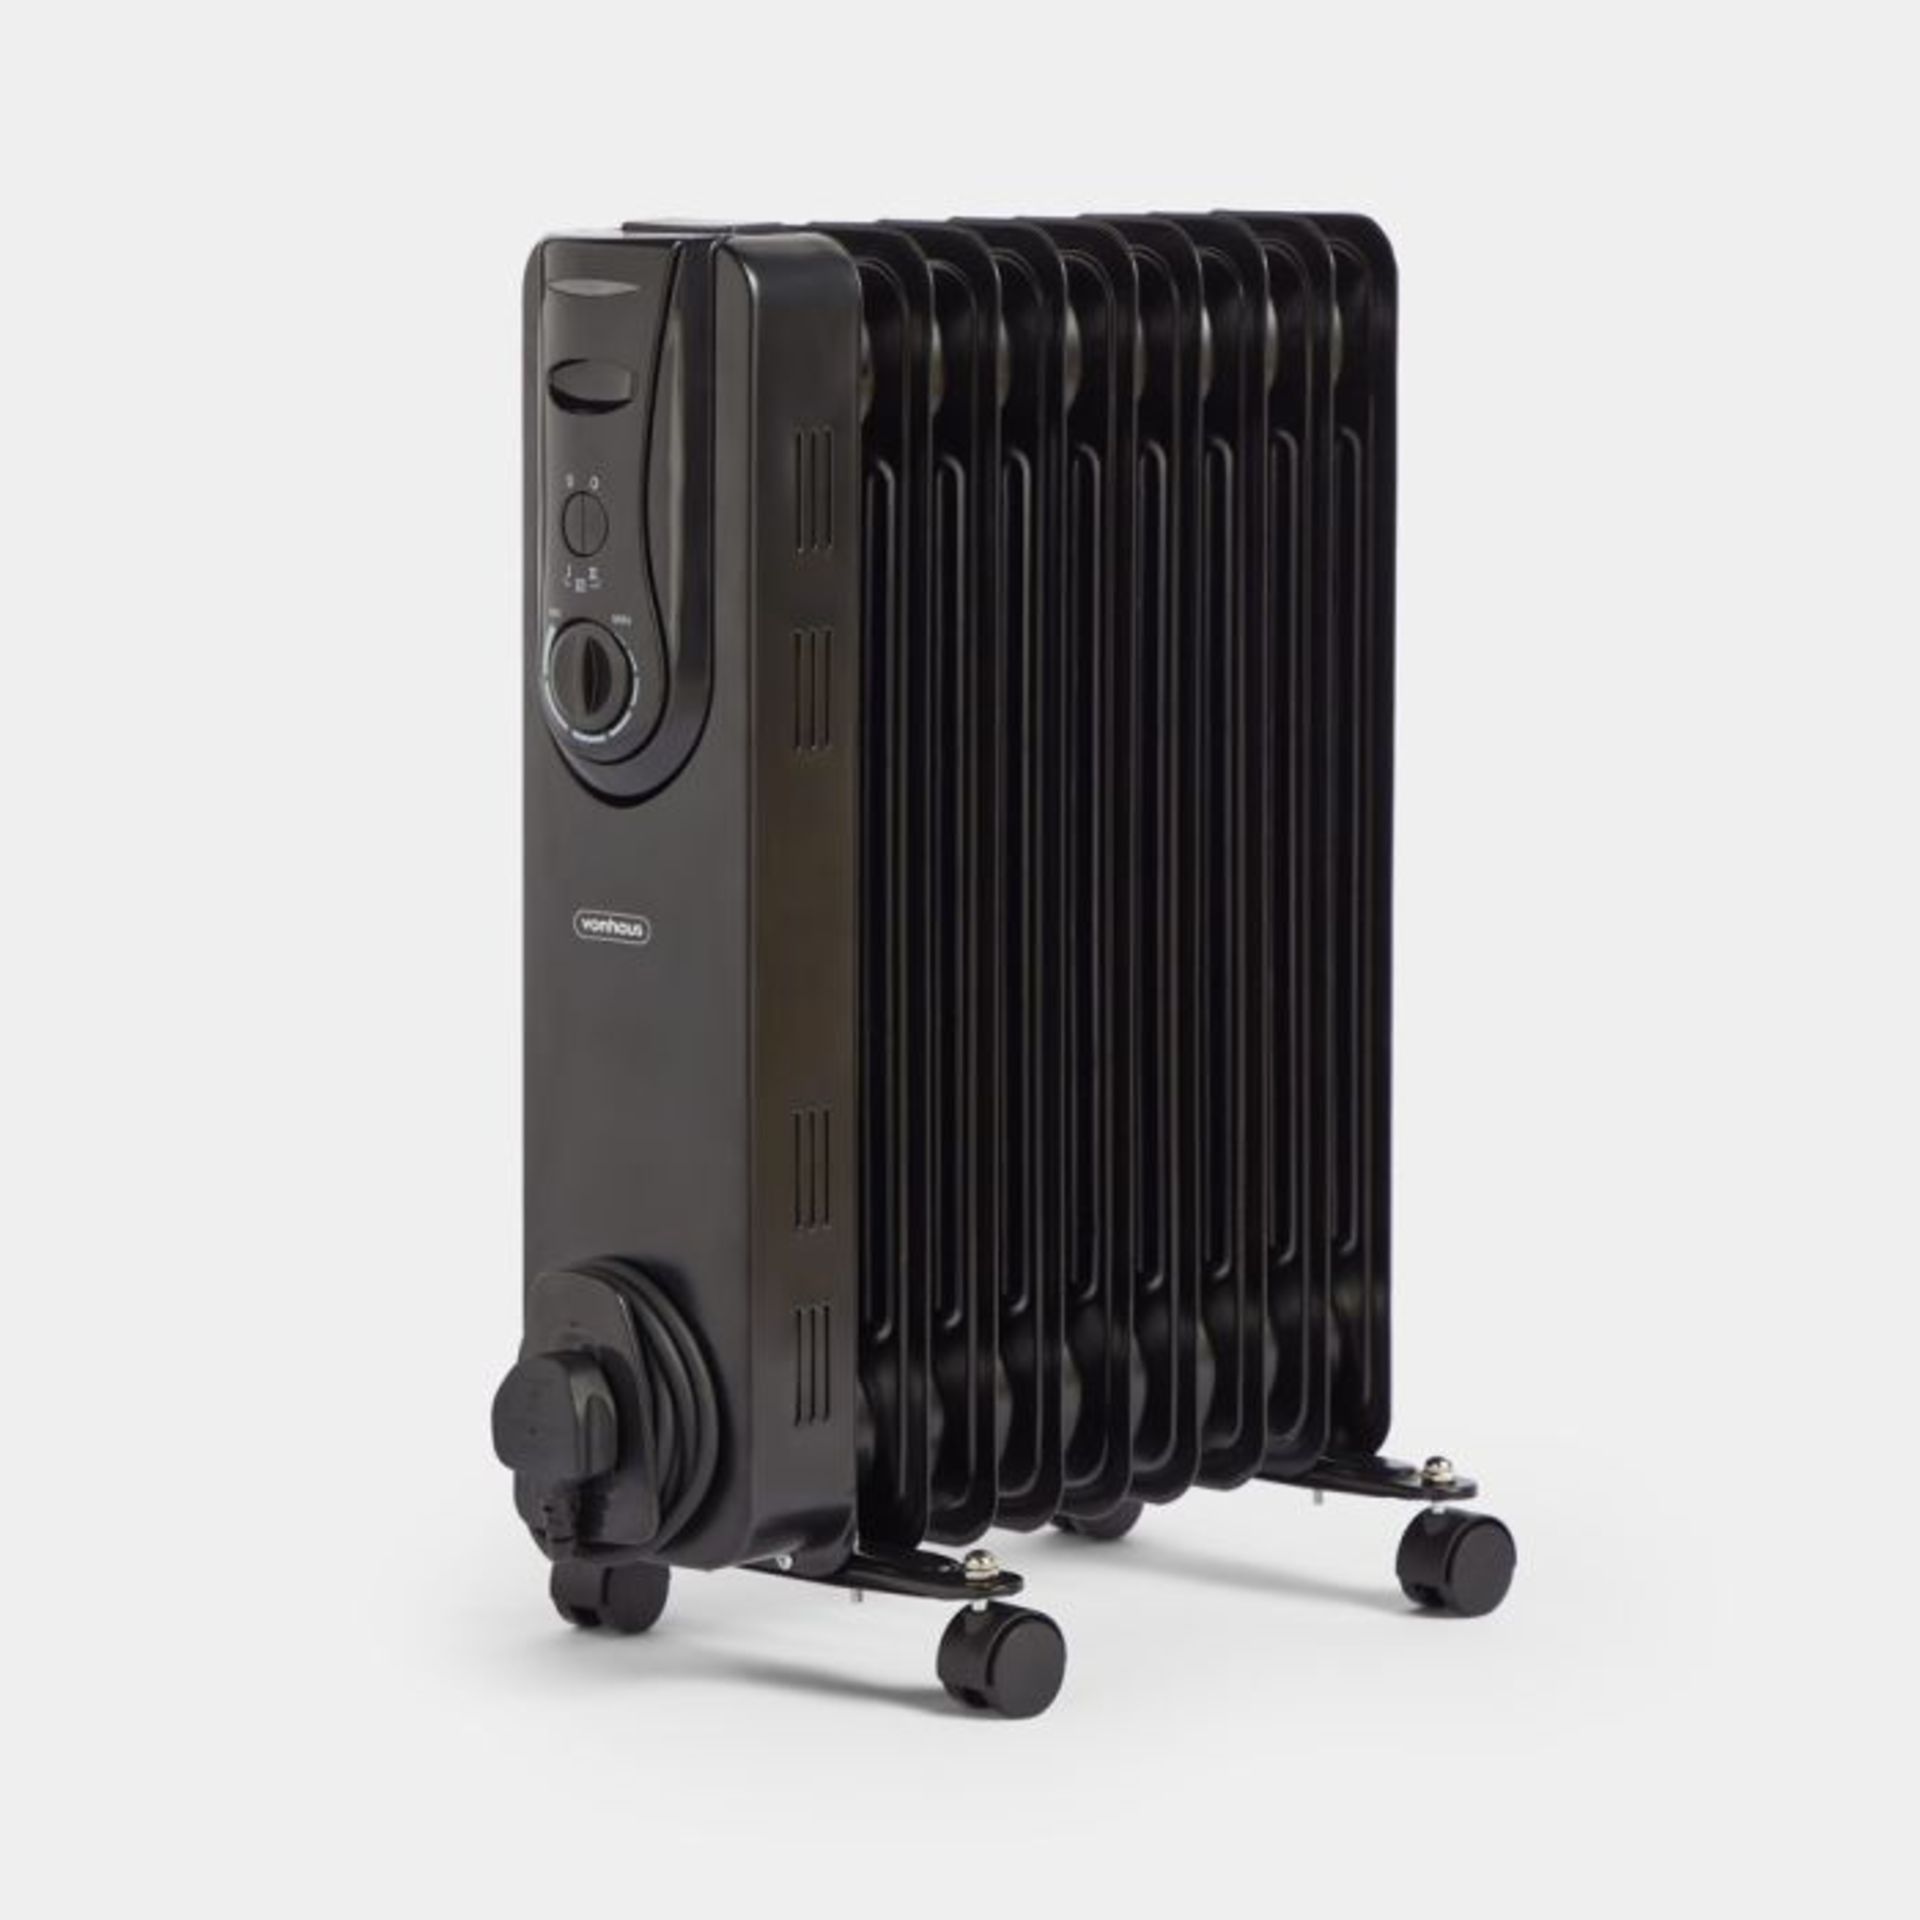 2x NEW & BOXED 9 Fin 2000W Oil Filled Radiator - BLACK. RRP £99.99. (890). Keep cold chills at bay